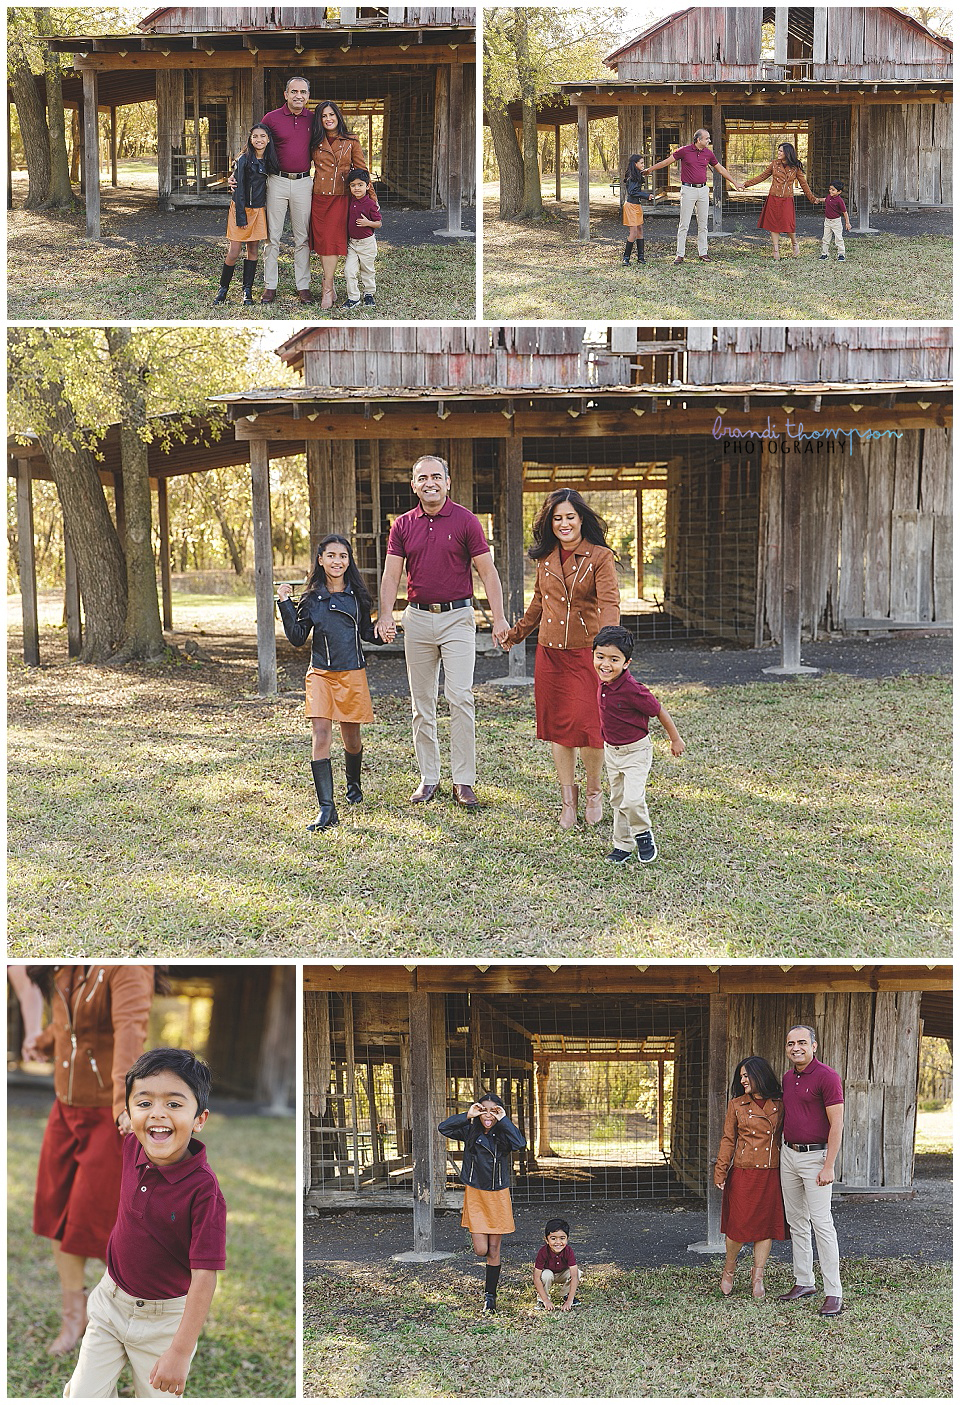 outdoor family photos of a south Asian family with dad, mom, tween girl and preschool boy wearing colors of mustard, tan, orange and dark red